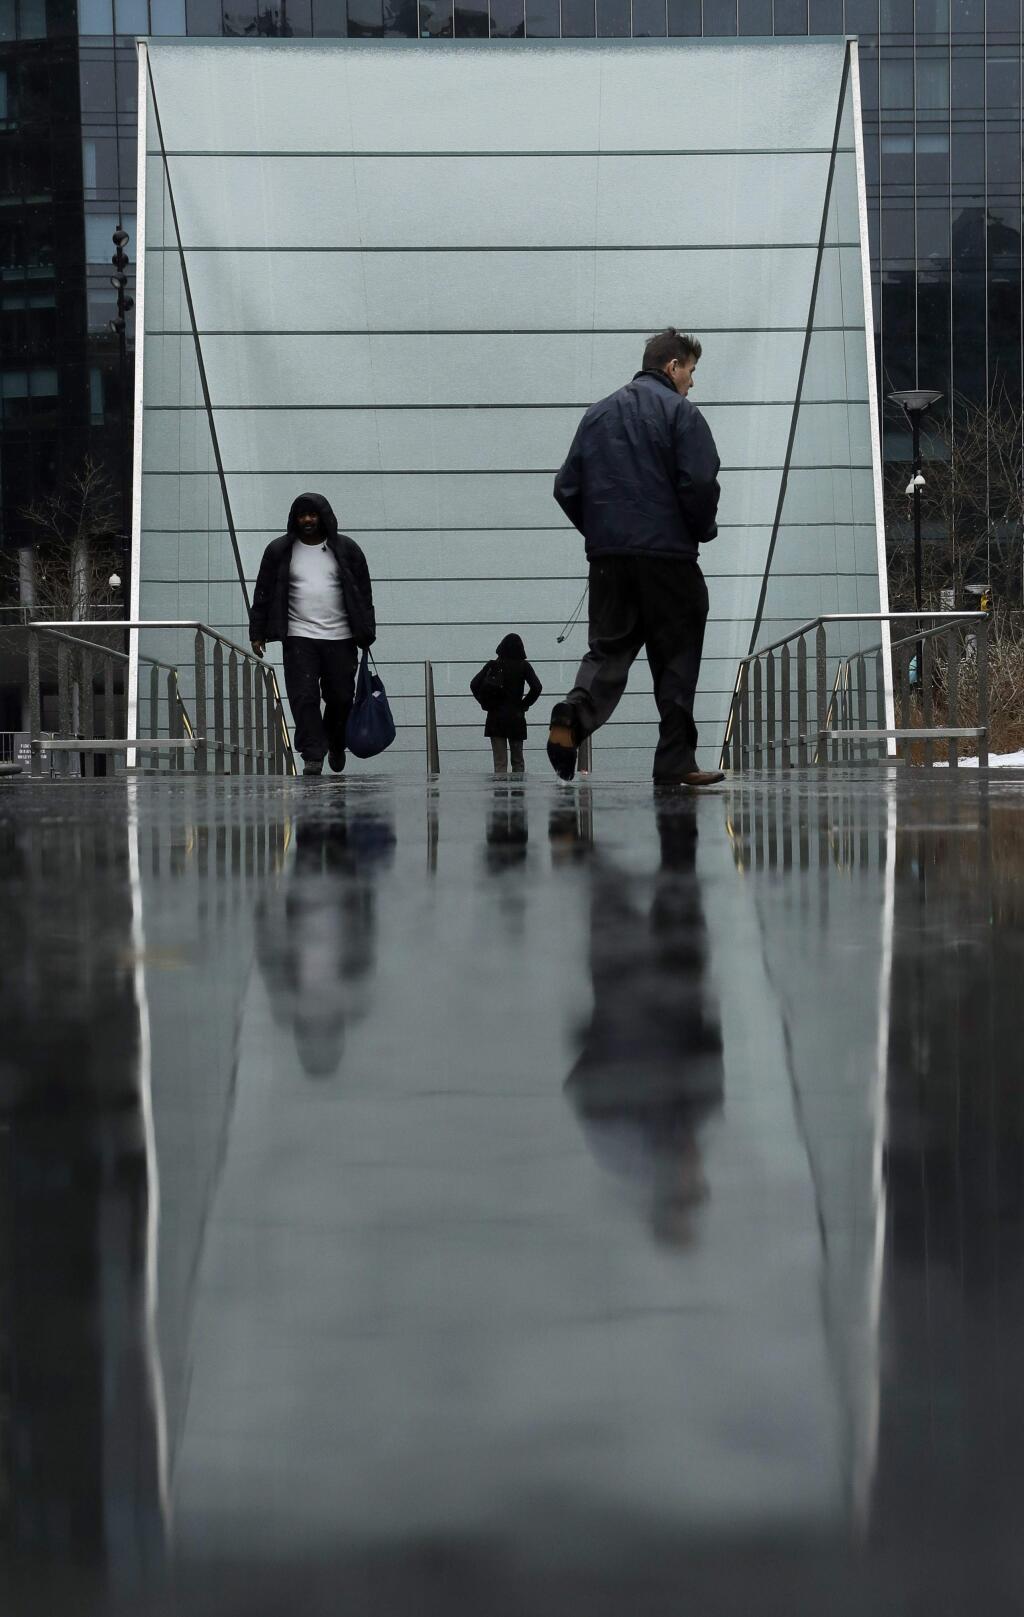 People walk near a subway station entrance at City Hall on Tuesday, March 20, 2018, in Philadelphia. The National Weather Service says a powerful storm packing heavy, wet snow and strong winds could dump up to 18 inches of snow in some locations on Wednesday. (AP Photo/Matt Slocum)